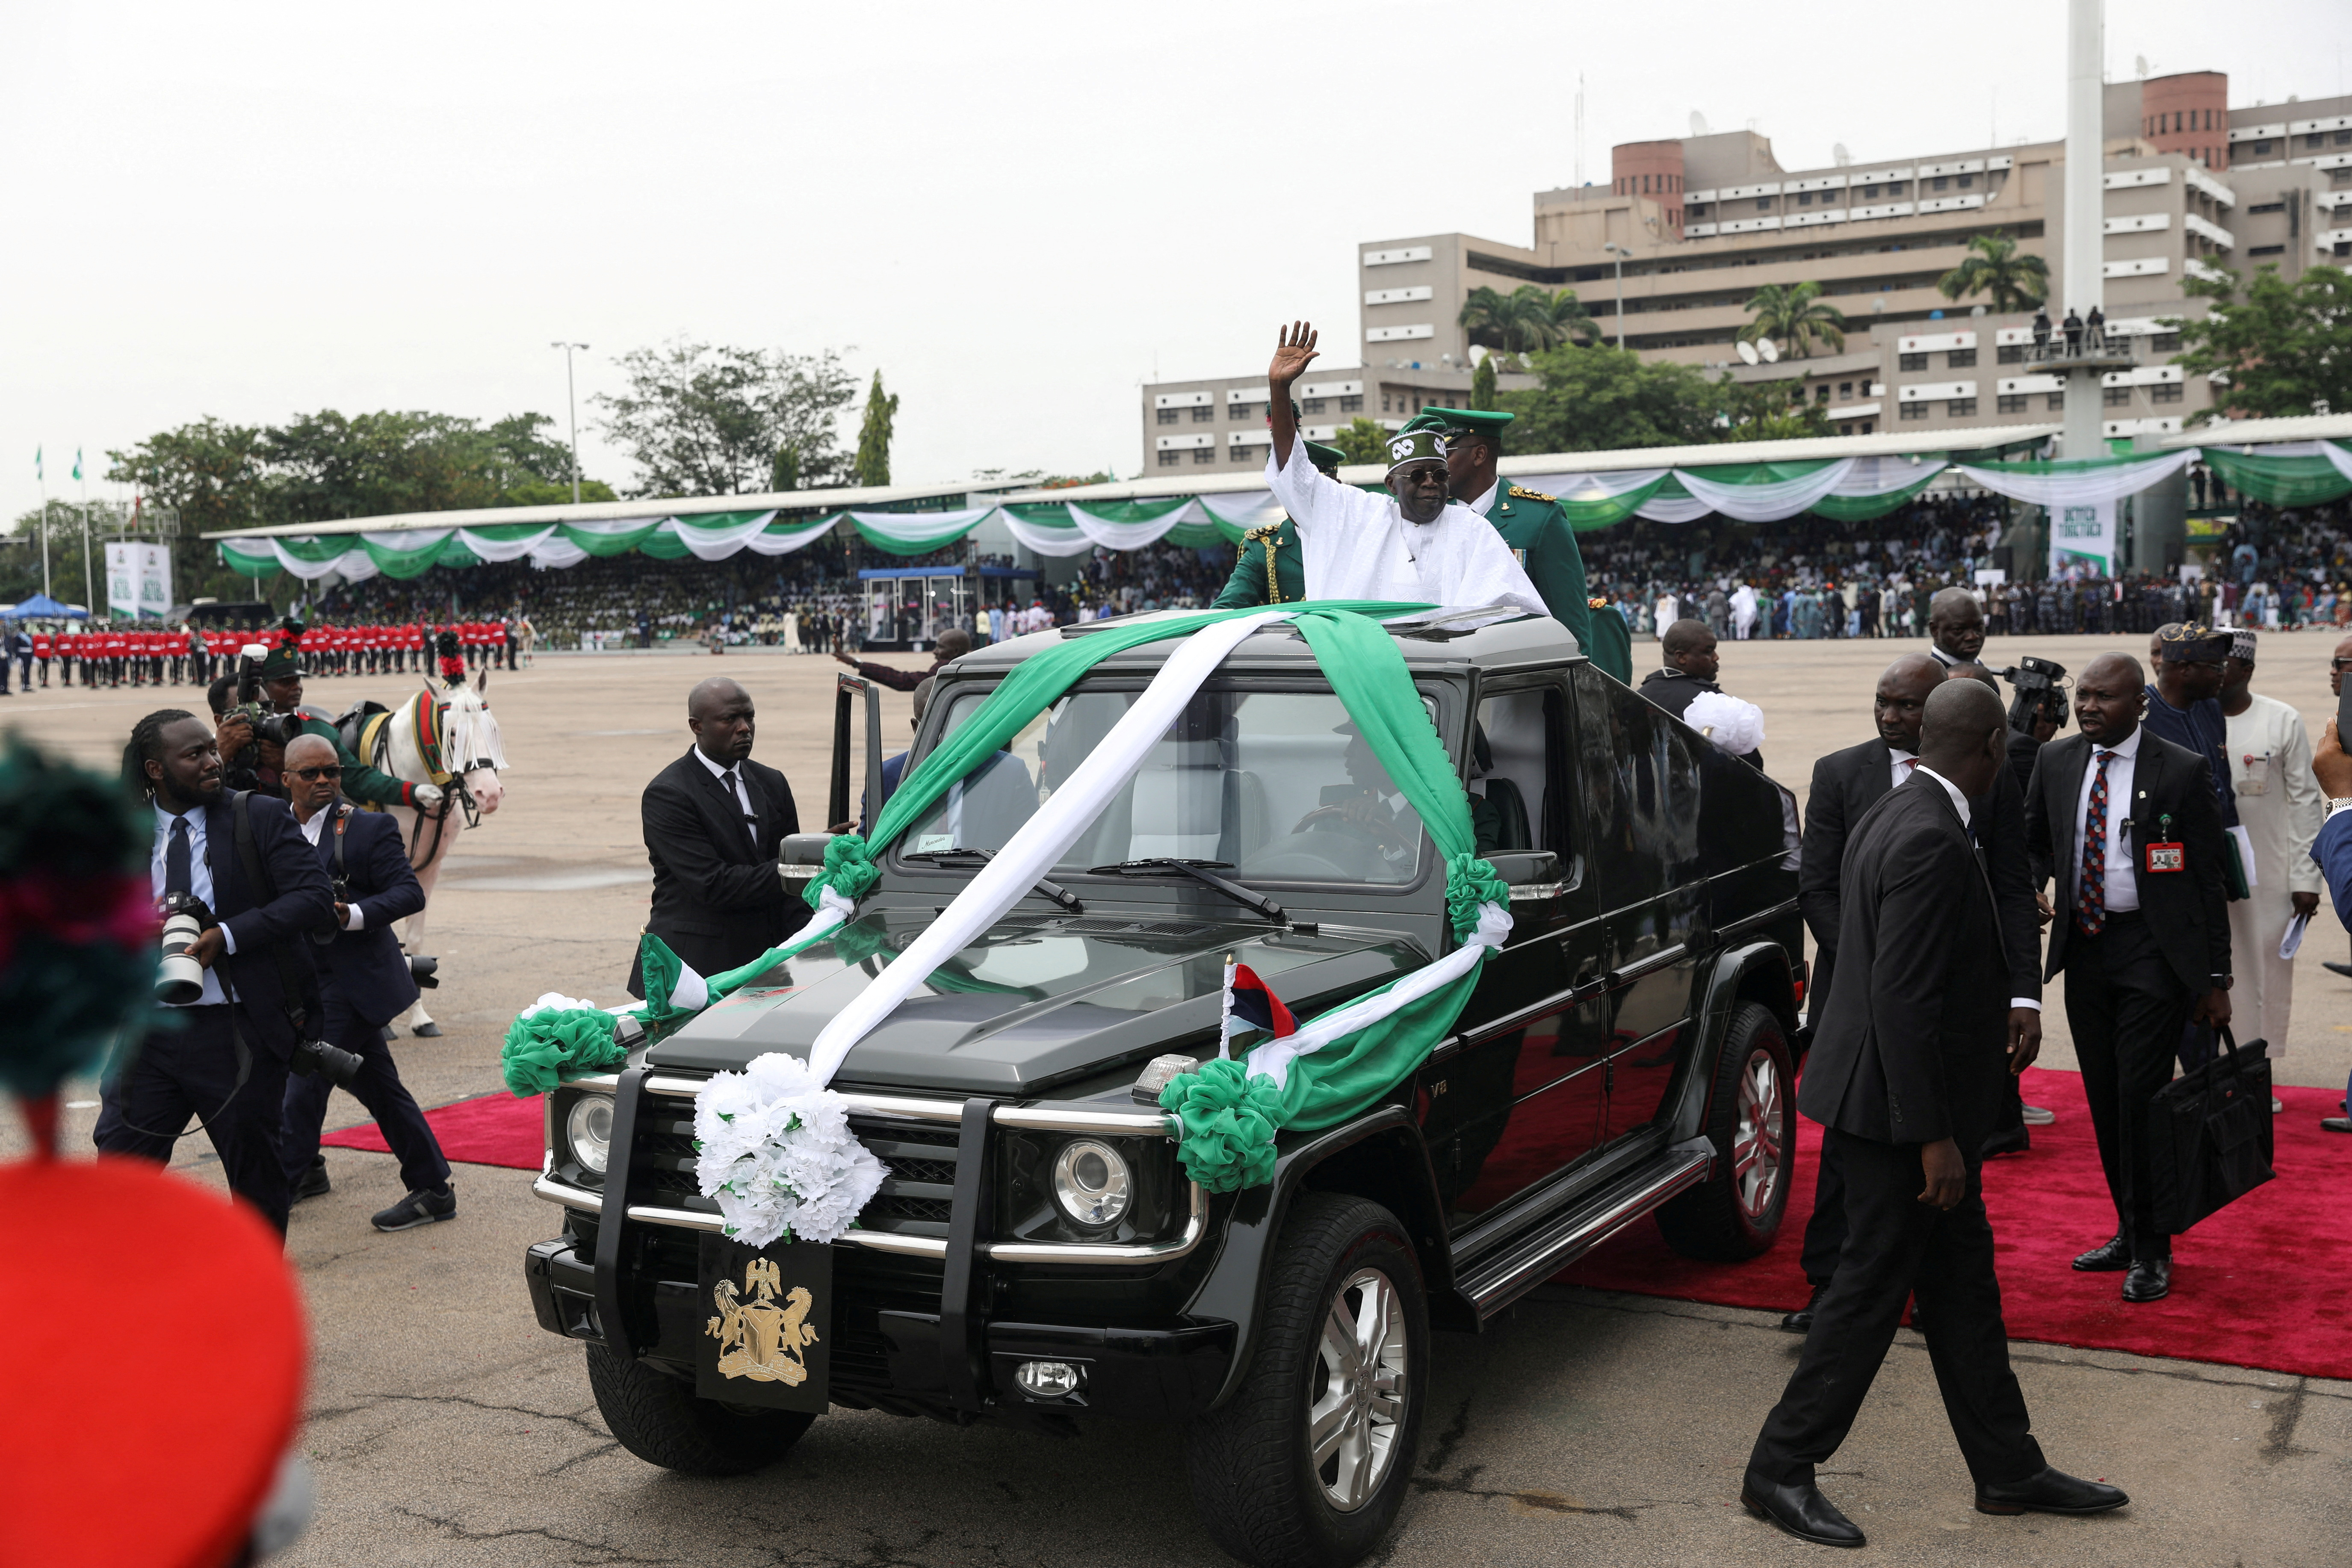 Nigeria's President Bola Tinubu waves to the crowd as he takes a traditional drive on a top of a ceremonial vehicle after his swearing-in ceremony in Abuja